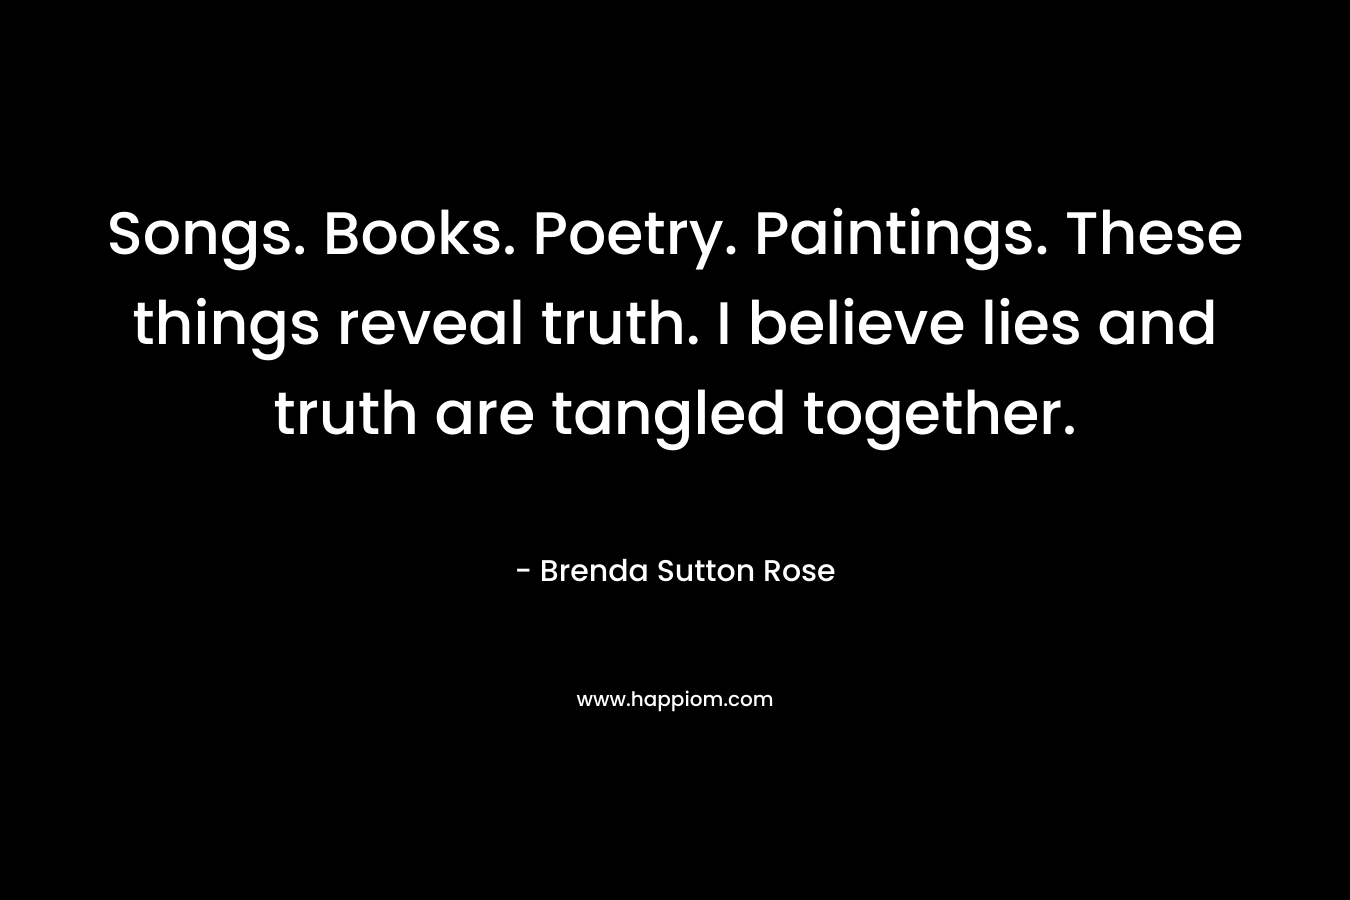 Songs. Books. Poetry. Paintings. These things reveal truth. I believe lies and truth are tangled together. – Brenda Sutton Rose